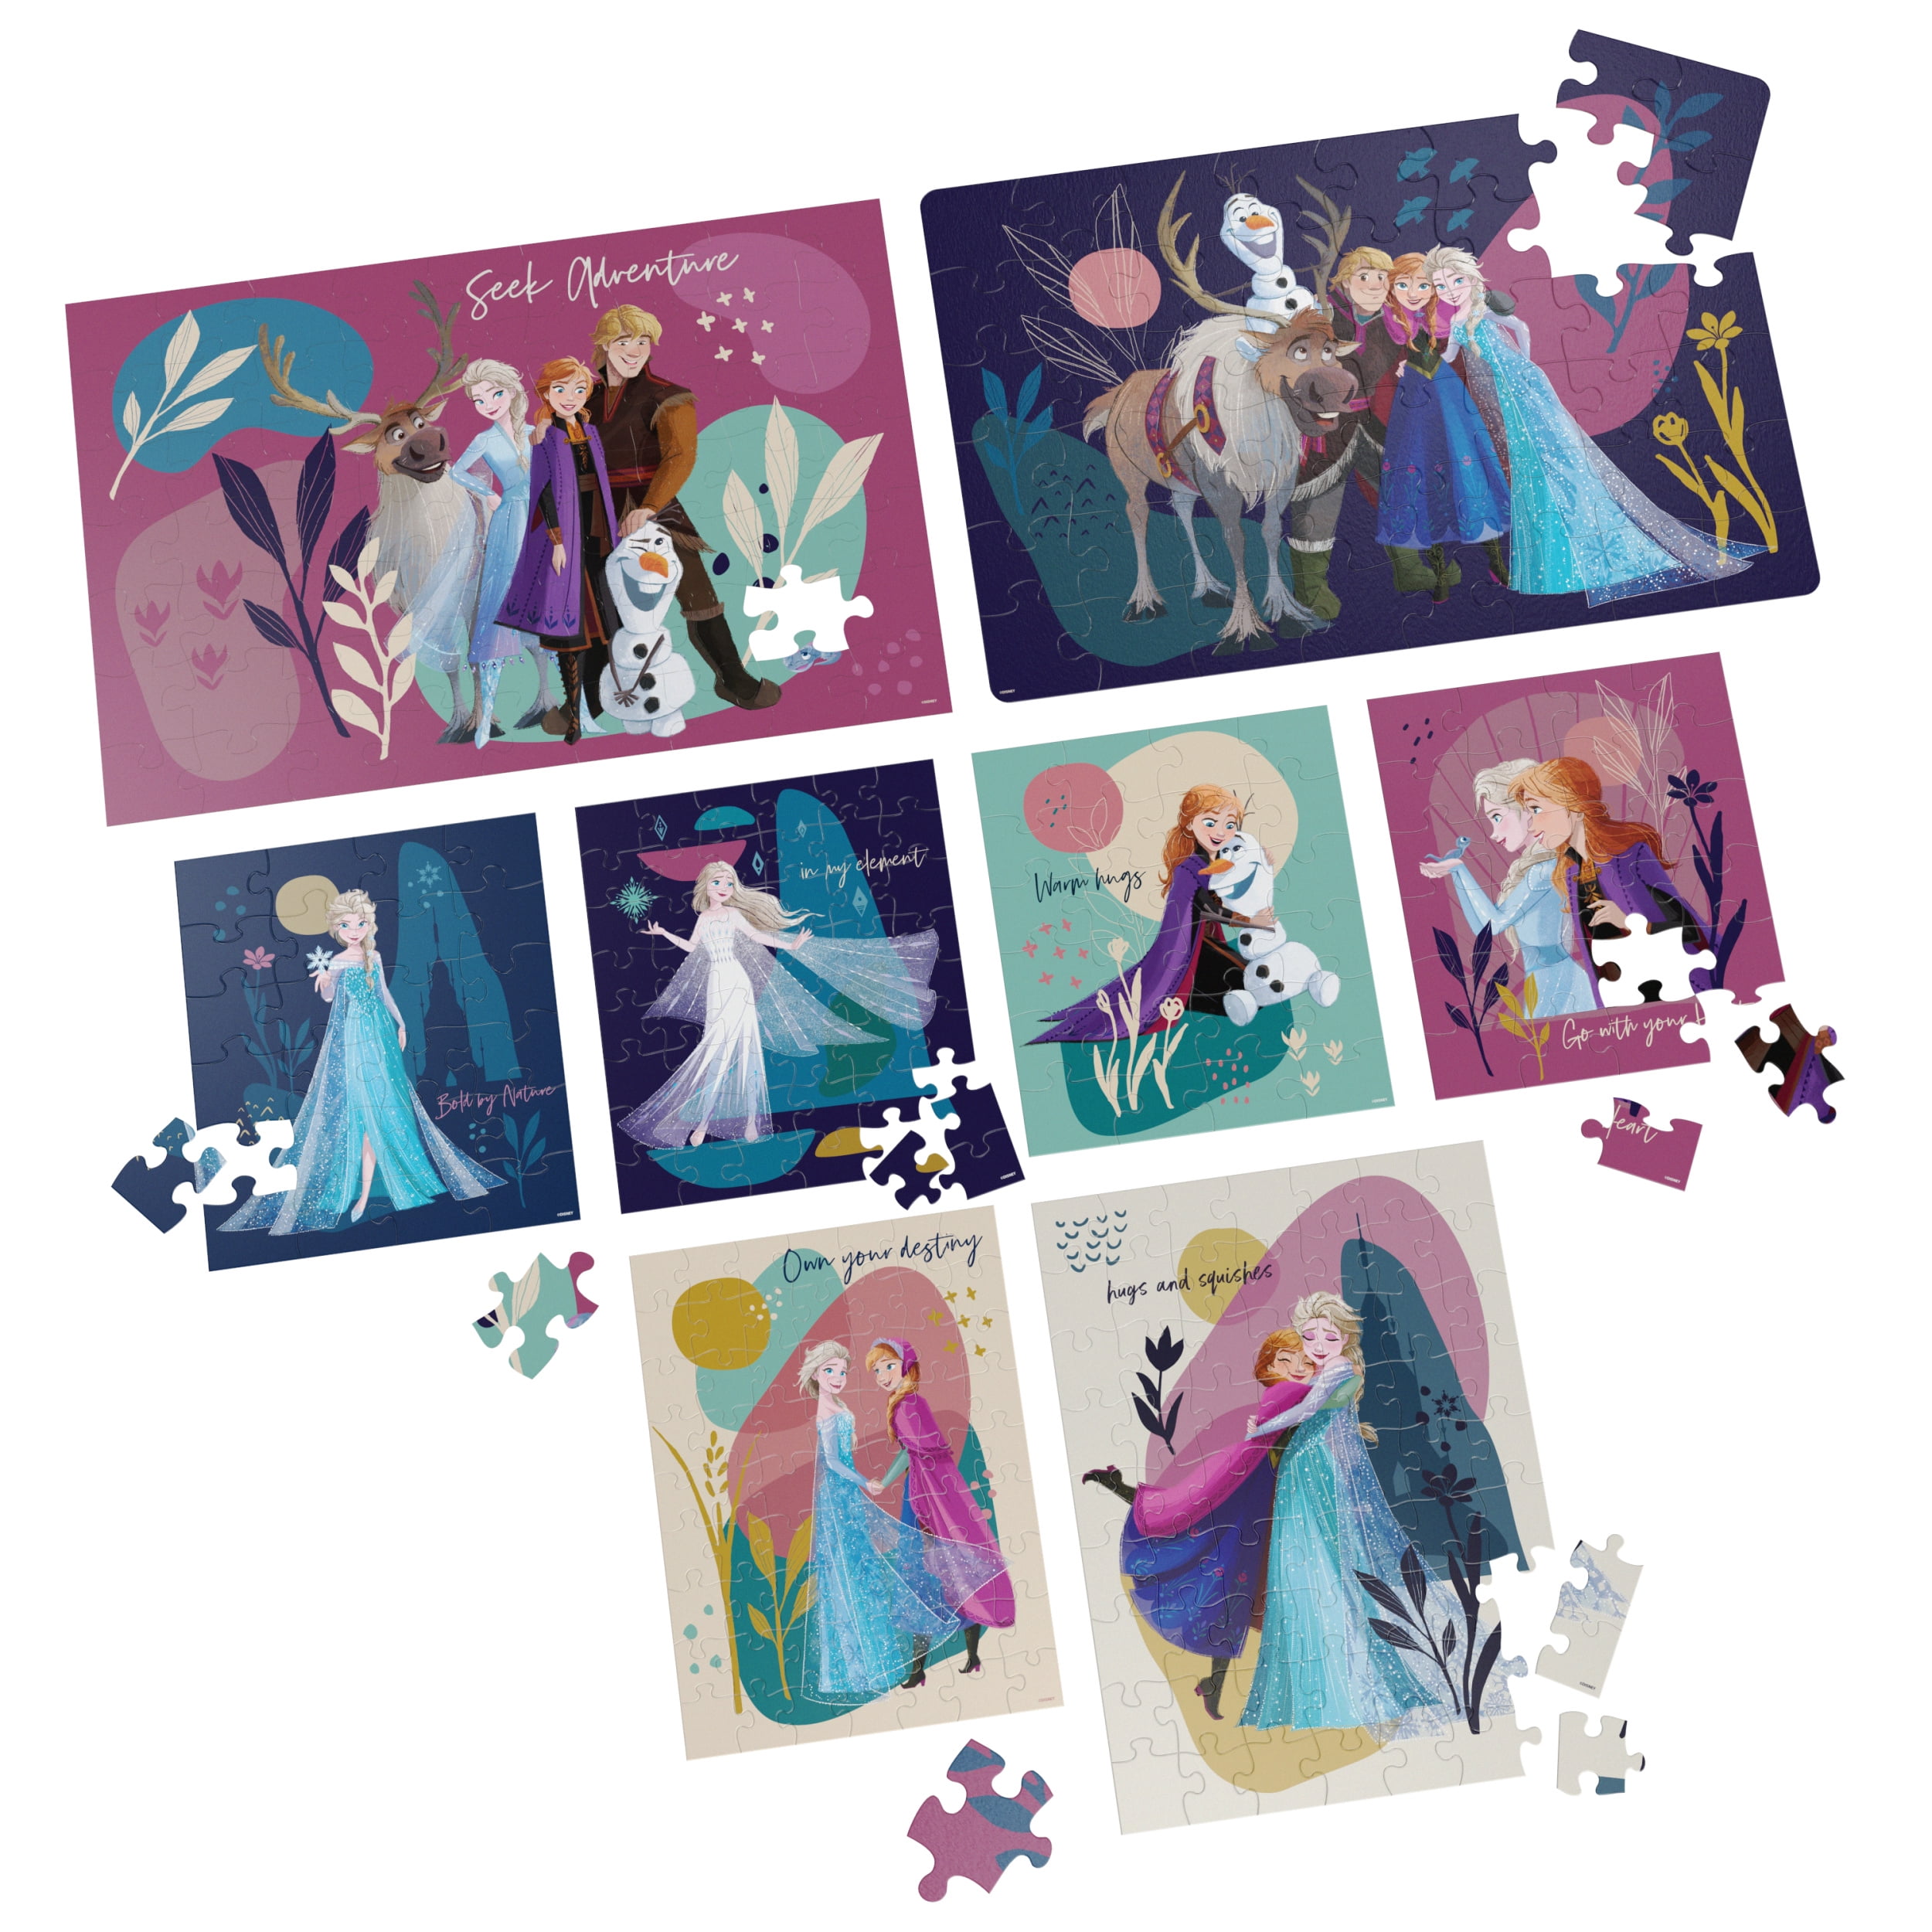 Cardinal SpinMaster - Disney Frozen 8 - Pack Interlocking Jigsaw Puzzle Bundle for Kids Ages 5 to 7